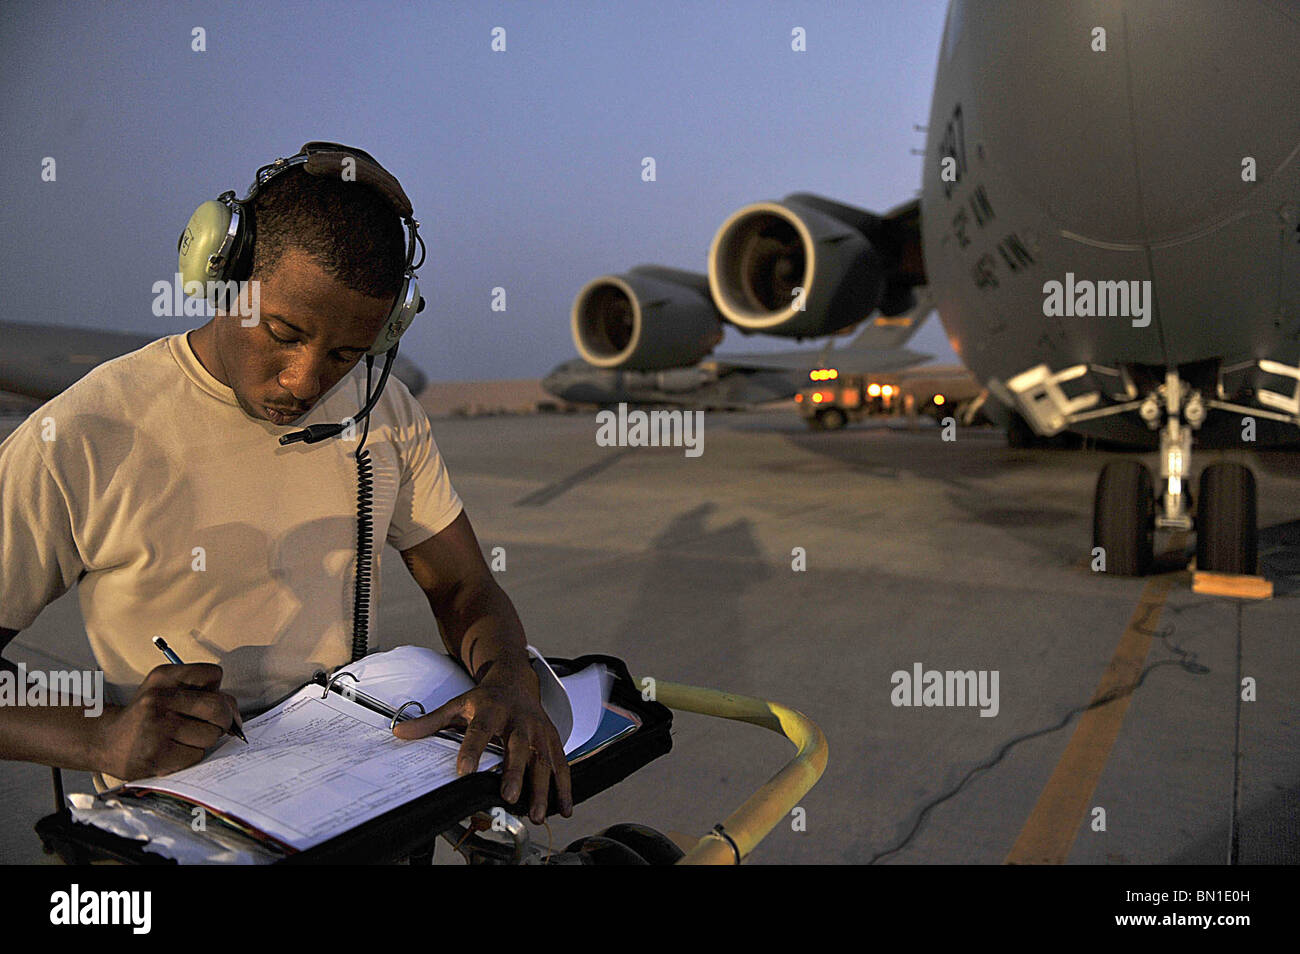 Senior Airman Cecil Bush completes paperwork before a C-17 Globemaster III airdrop May 27, 2010, in Afghanistan. Stock Photo